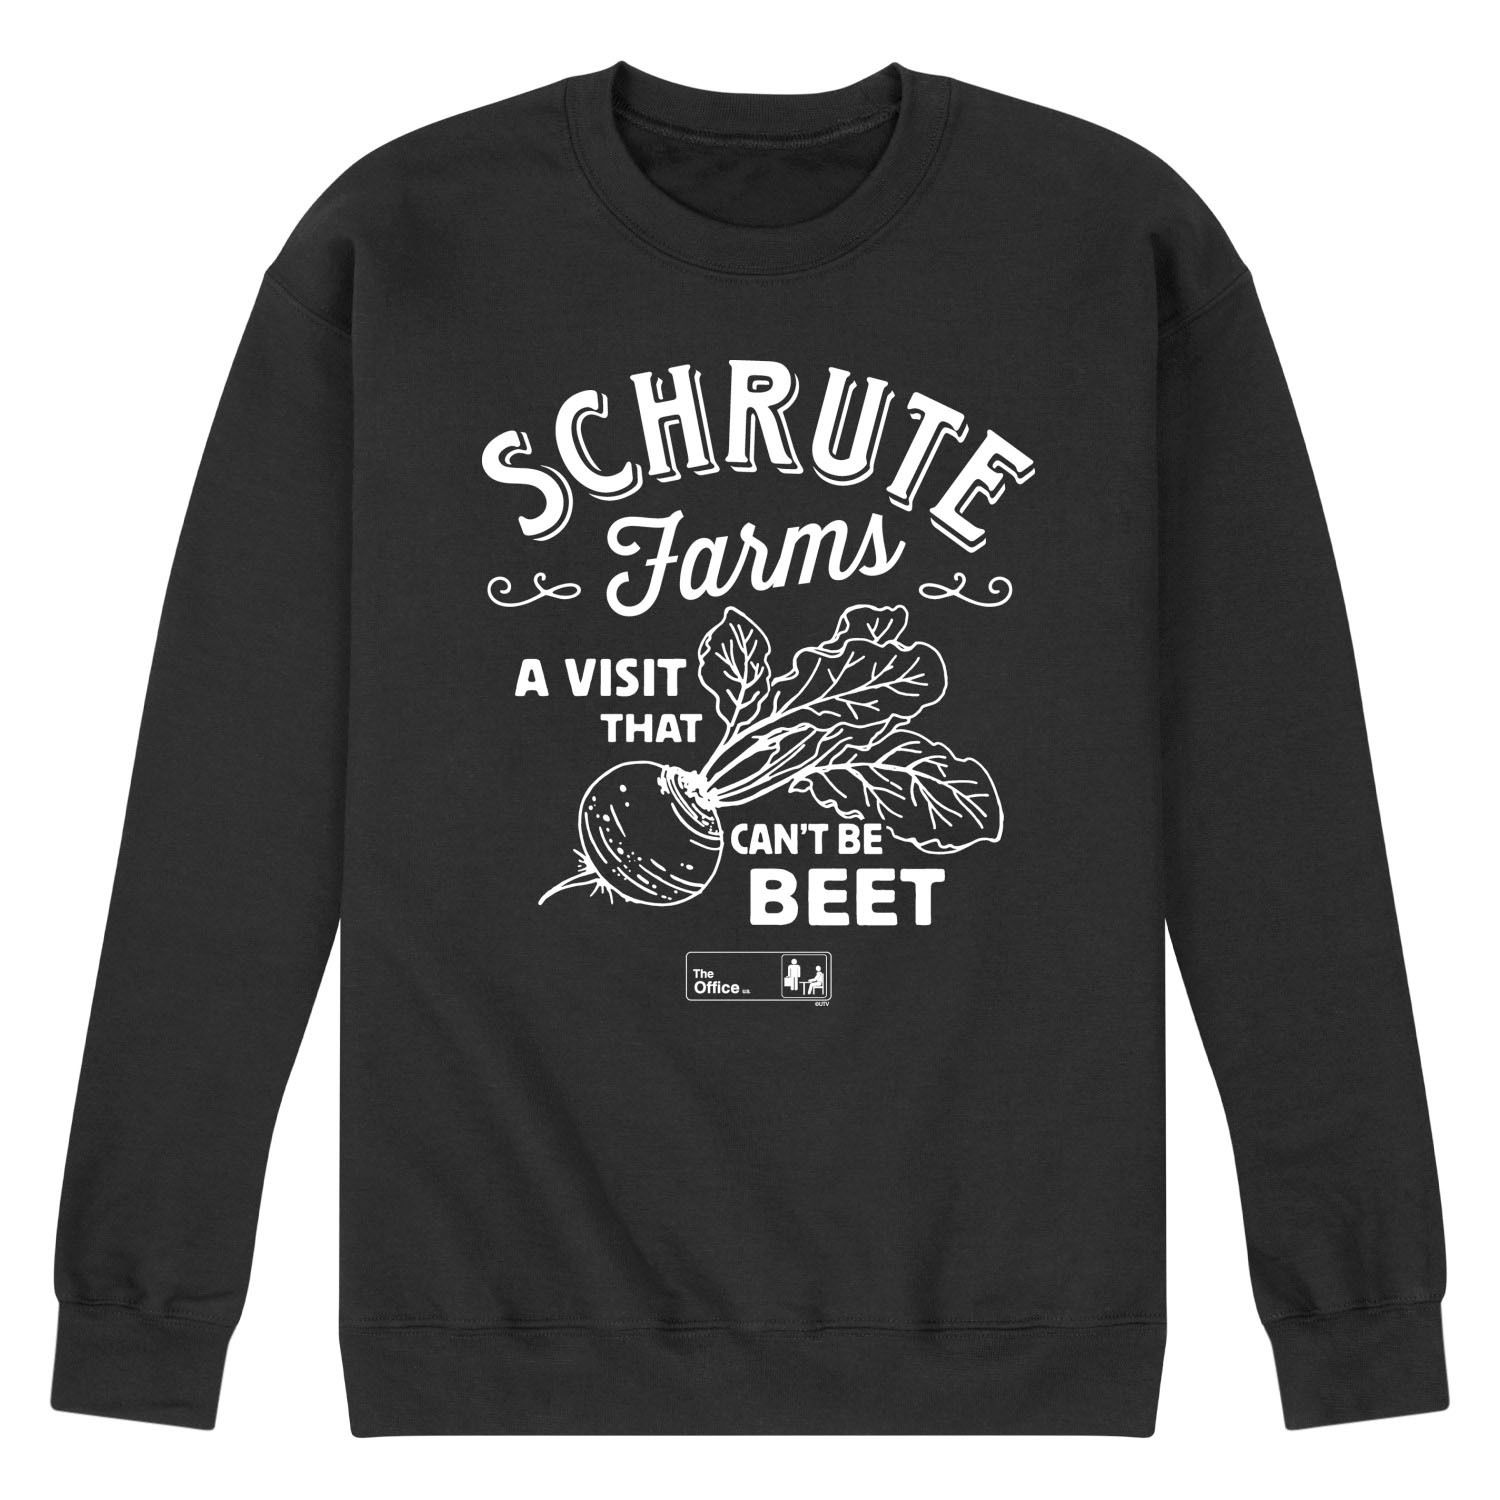 Мужской свитшот The Office Schrute Farms Licensed Character office us schrute farms bed